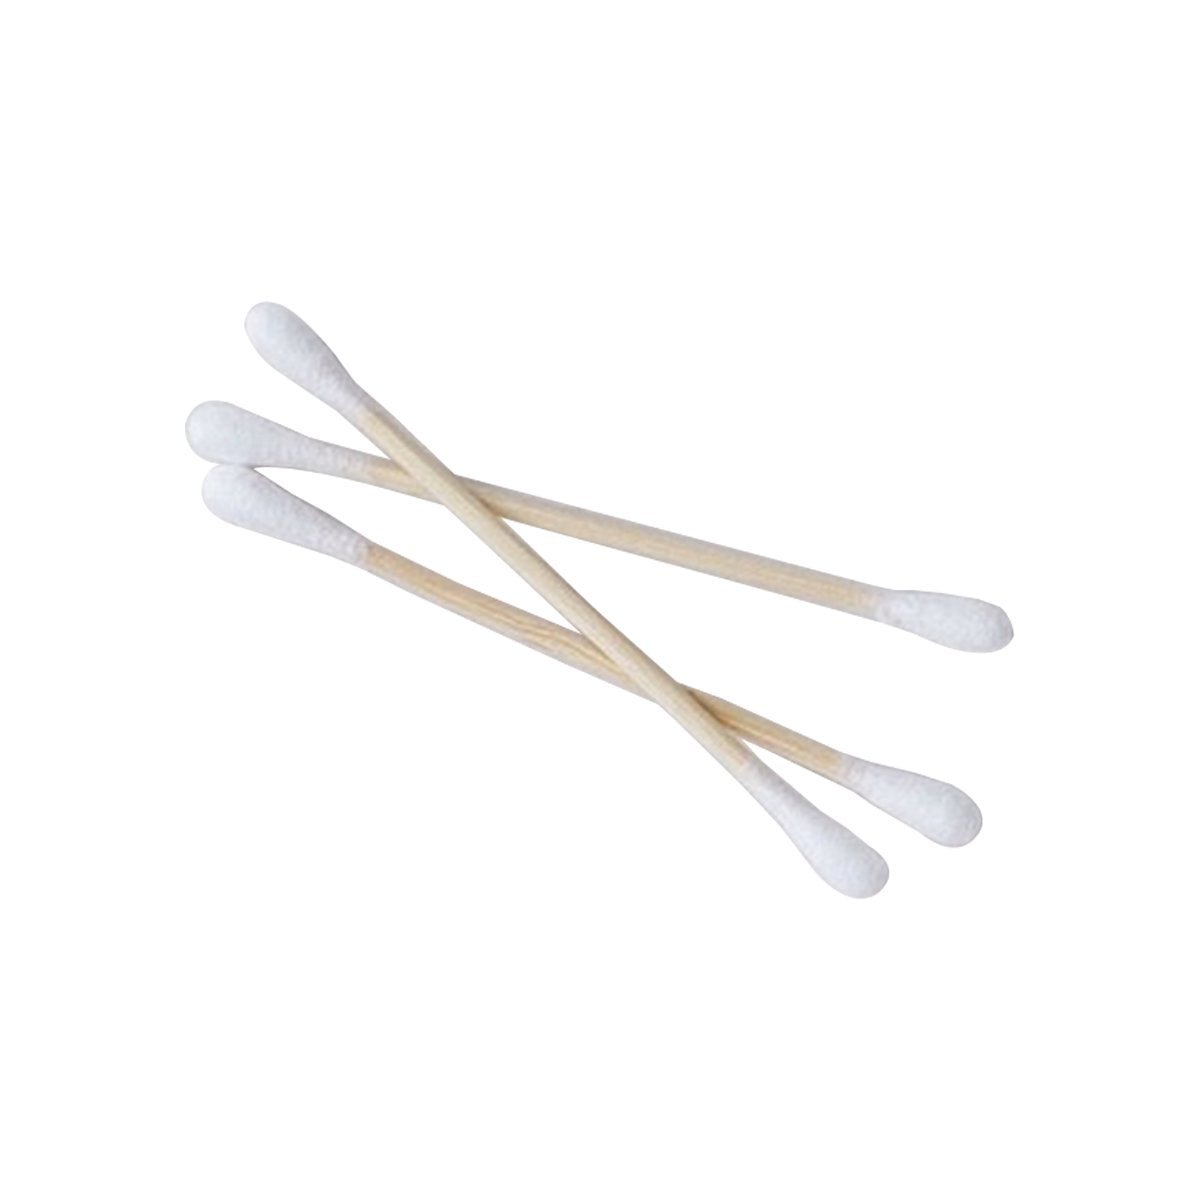 Brush It On Bamboo Cotton Buds: 100 Pack